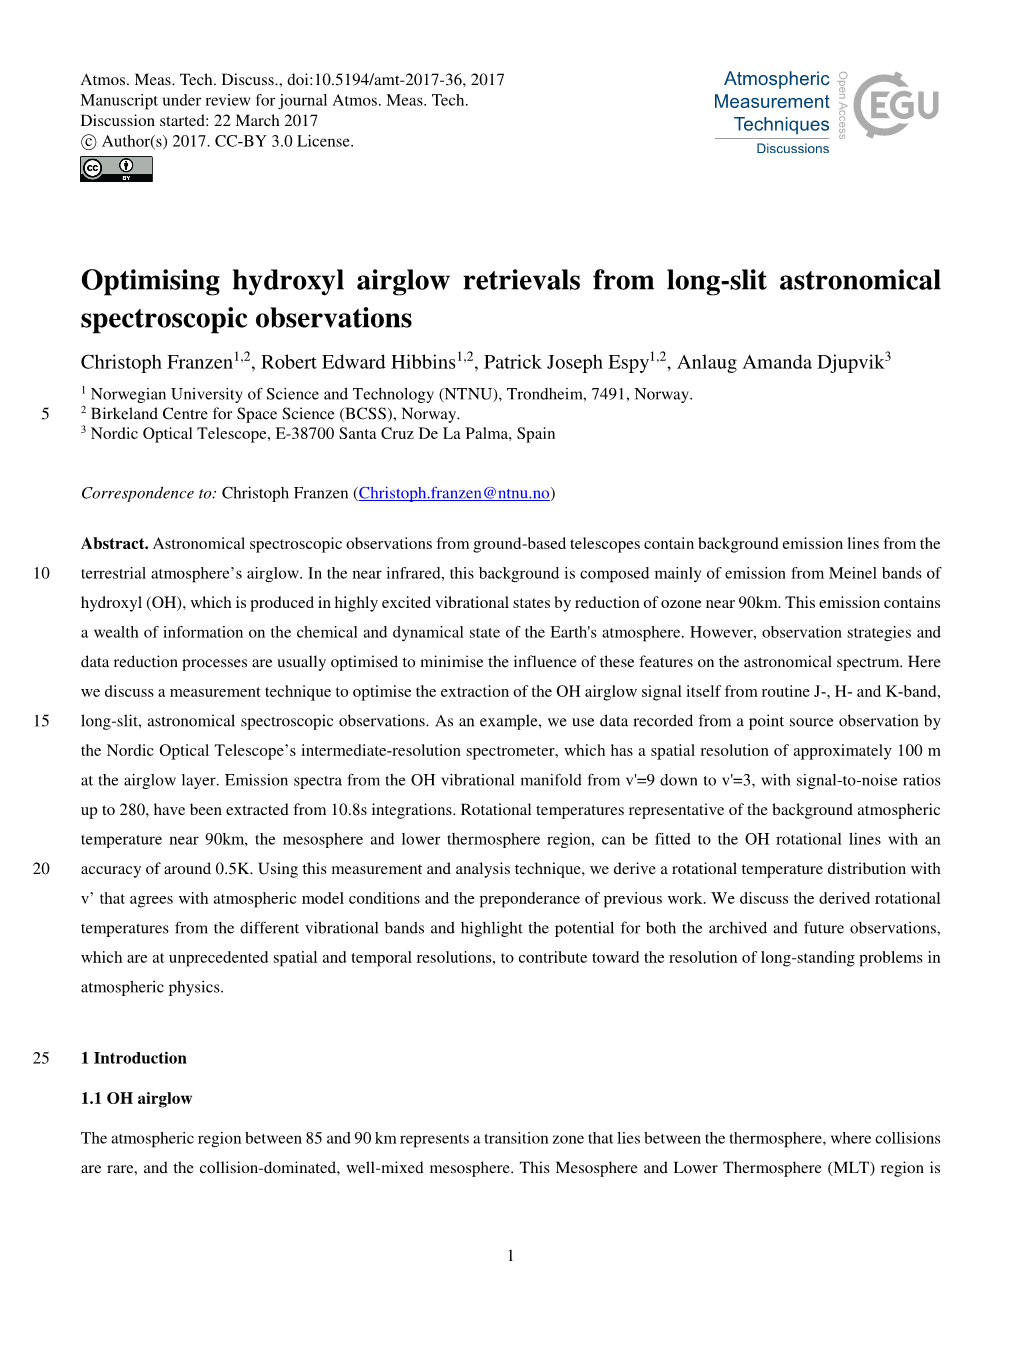 Optimising Hydroxyl Airglow Retrievals from Long-Slit Astronomical